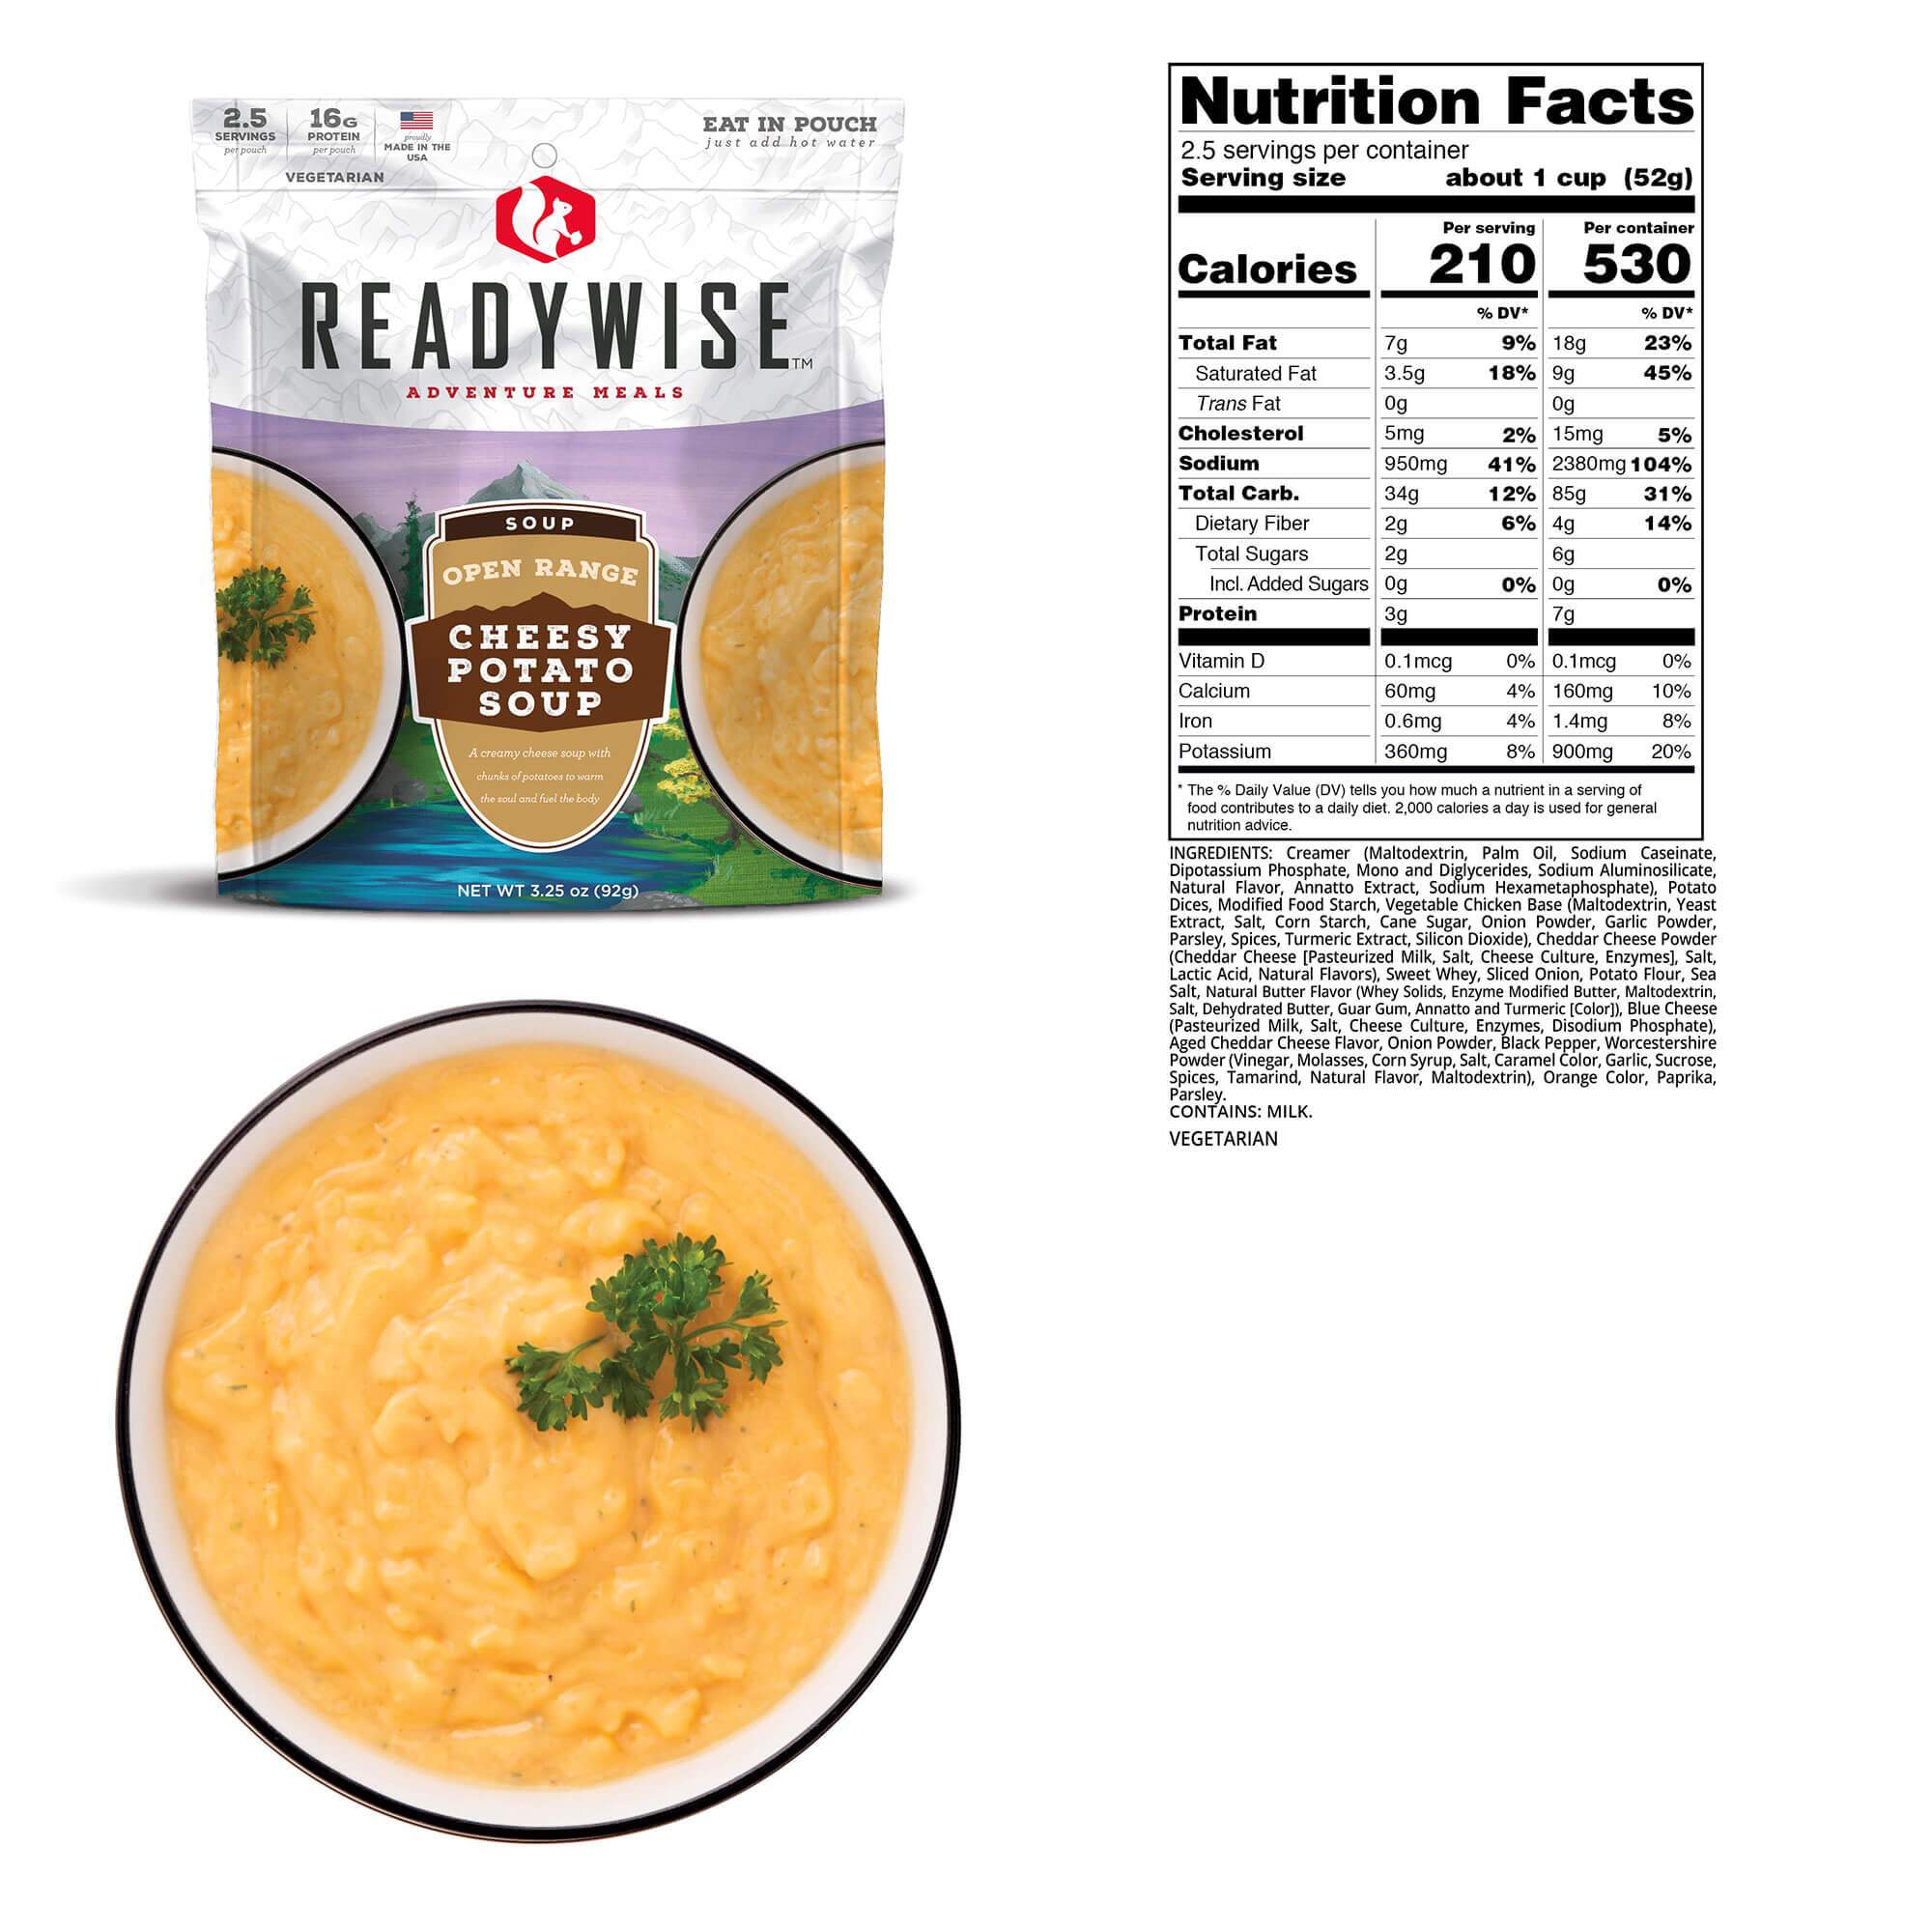 A package of ReadyWise (formerly Wise Food Storage) Open Range Cheesy Potato Soup 6 Pack (SHIPS IN 1-2 WEEKS) and a bag of parsley.